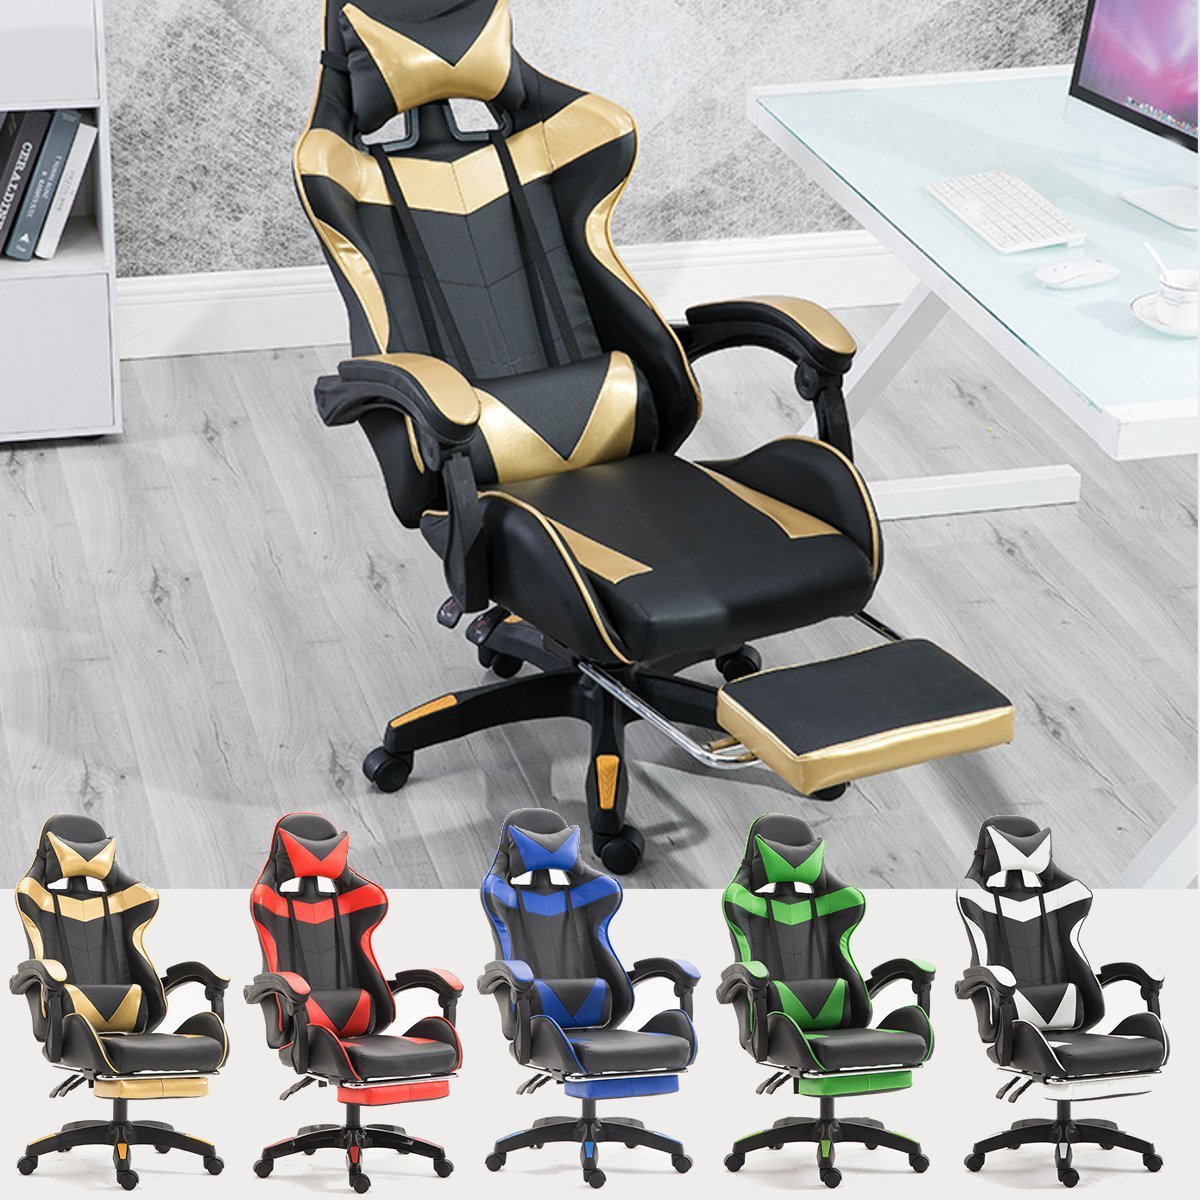 GameQ™ Reclining Gaming Chair Video Gamer Chair Footrest Ergonomic